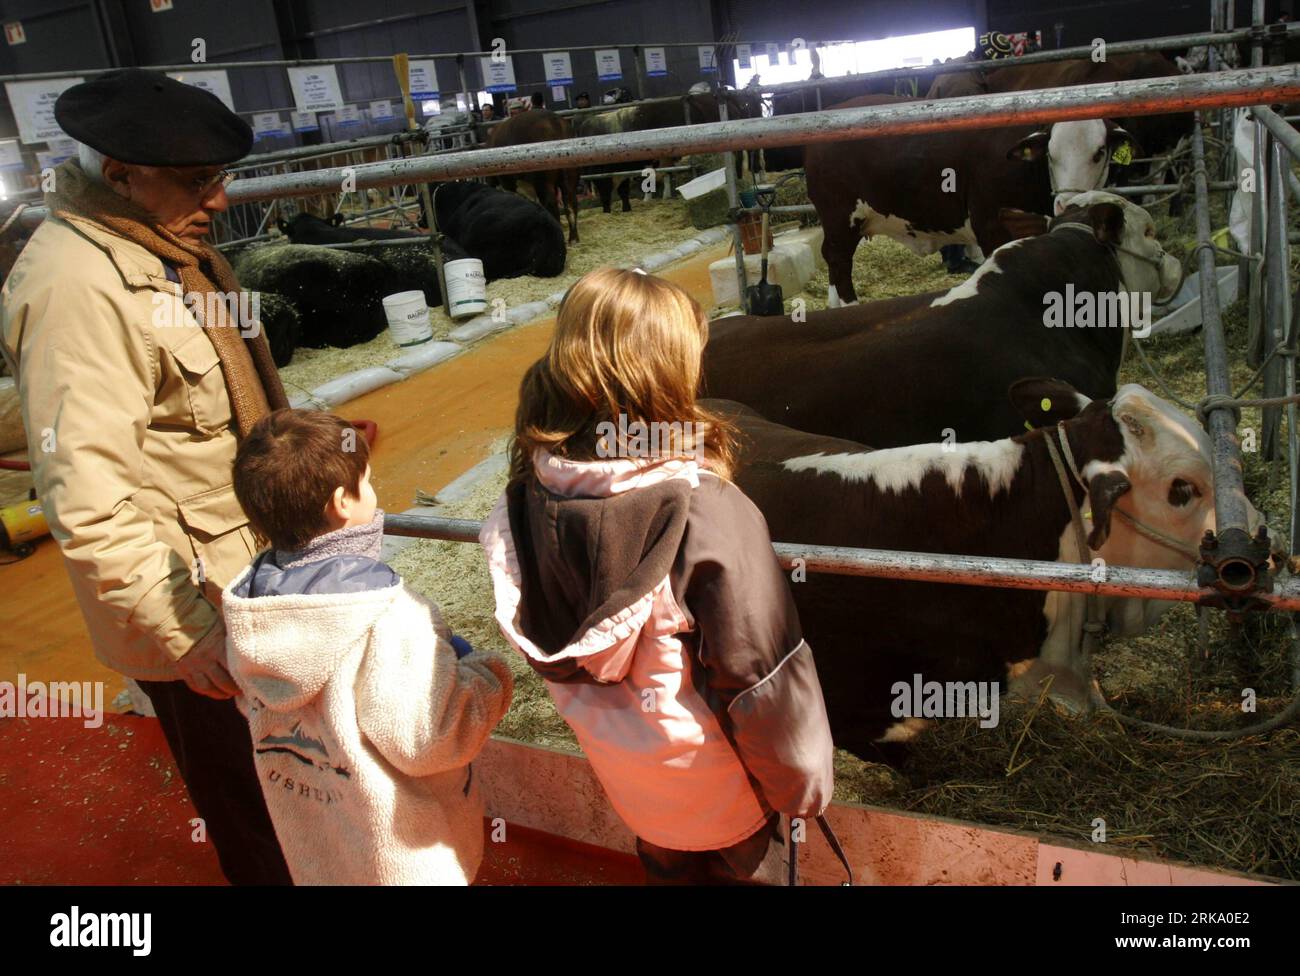 Bildnummer: 54249463  Datum: 23.07.2010  Copyright: imago/Xinhua (100723) -- BUENOS AIRES, July 23, 2010 (Xinhua) -- Visitors look at the cattle at the 124th edition of the Agriculture, Livestock and Industry Fair in Buenos Aires, Argentina, July 23, 2010. Some 4,000 livestocks from 450 Argentine farms were on show in the fair. (Xinhua/Luciano Thieberger) (zw) (4)ARGENTINA-BUENOS AIRES-AGRICULTURE-LIVESTOCK-FAIR PUBLICATIONxNOTxINxCHN Wirtschaft Messe Landwirtschaftsmesse Landwirtschaft Premiumd xint kbdig xub 2010 quer o0 Kalb, Kuh, Tiere    Bildnummer 54249463 Date 23 07 2010 Copyright Imago Stock Photo